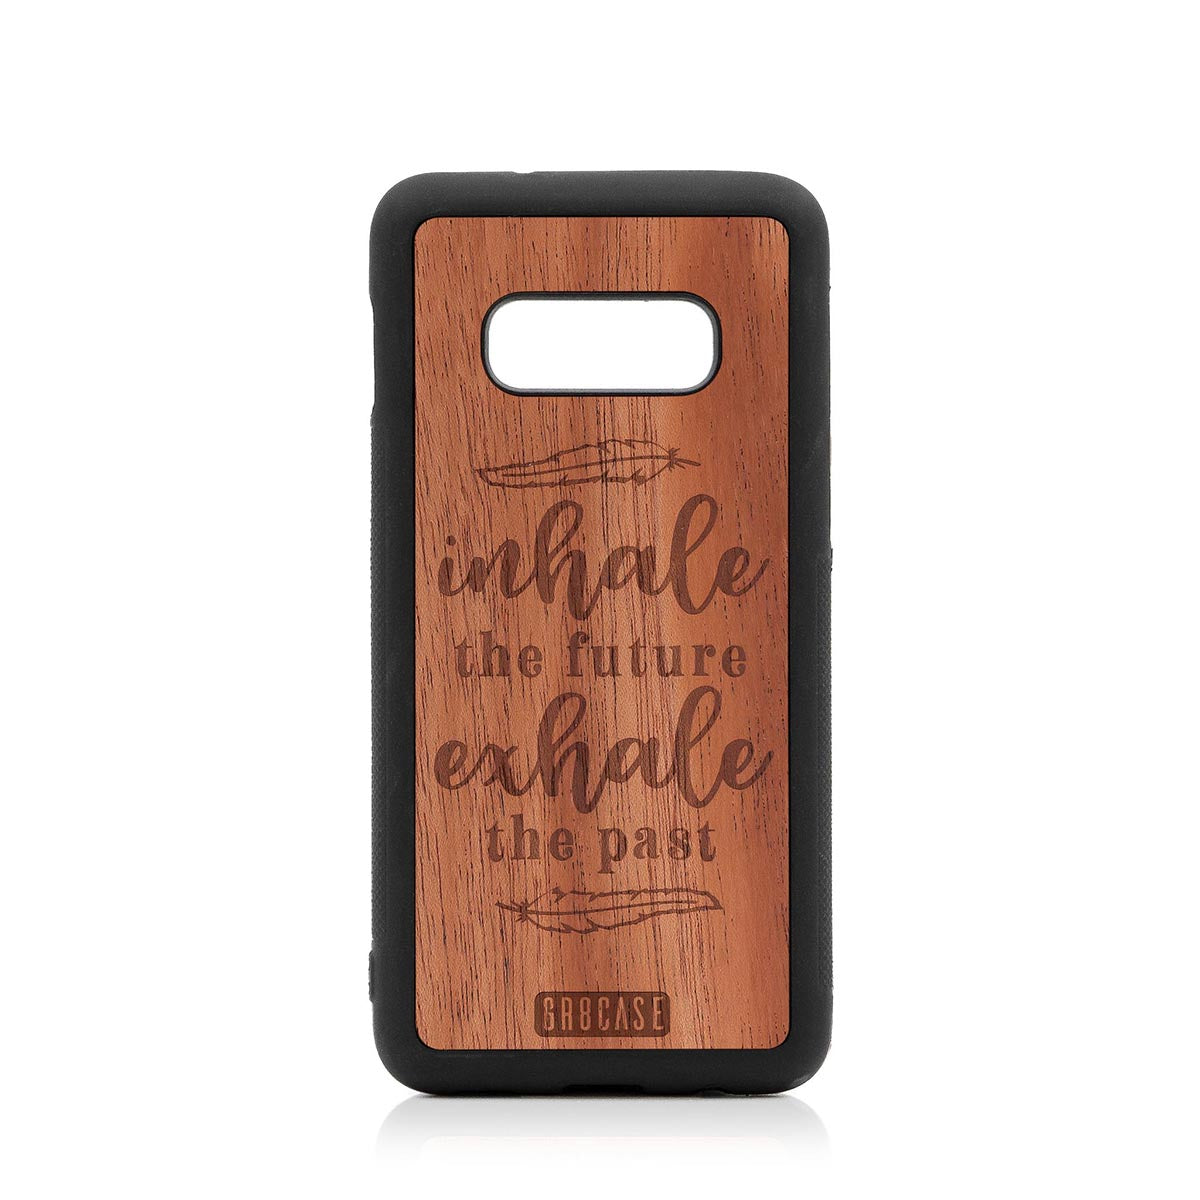 Inhale The Future Exhale The Past Design Wood Case Samsung Galaxy S10E by GR8CASE